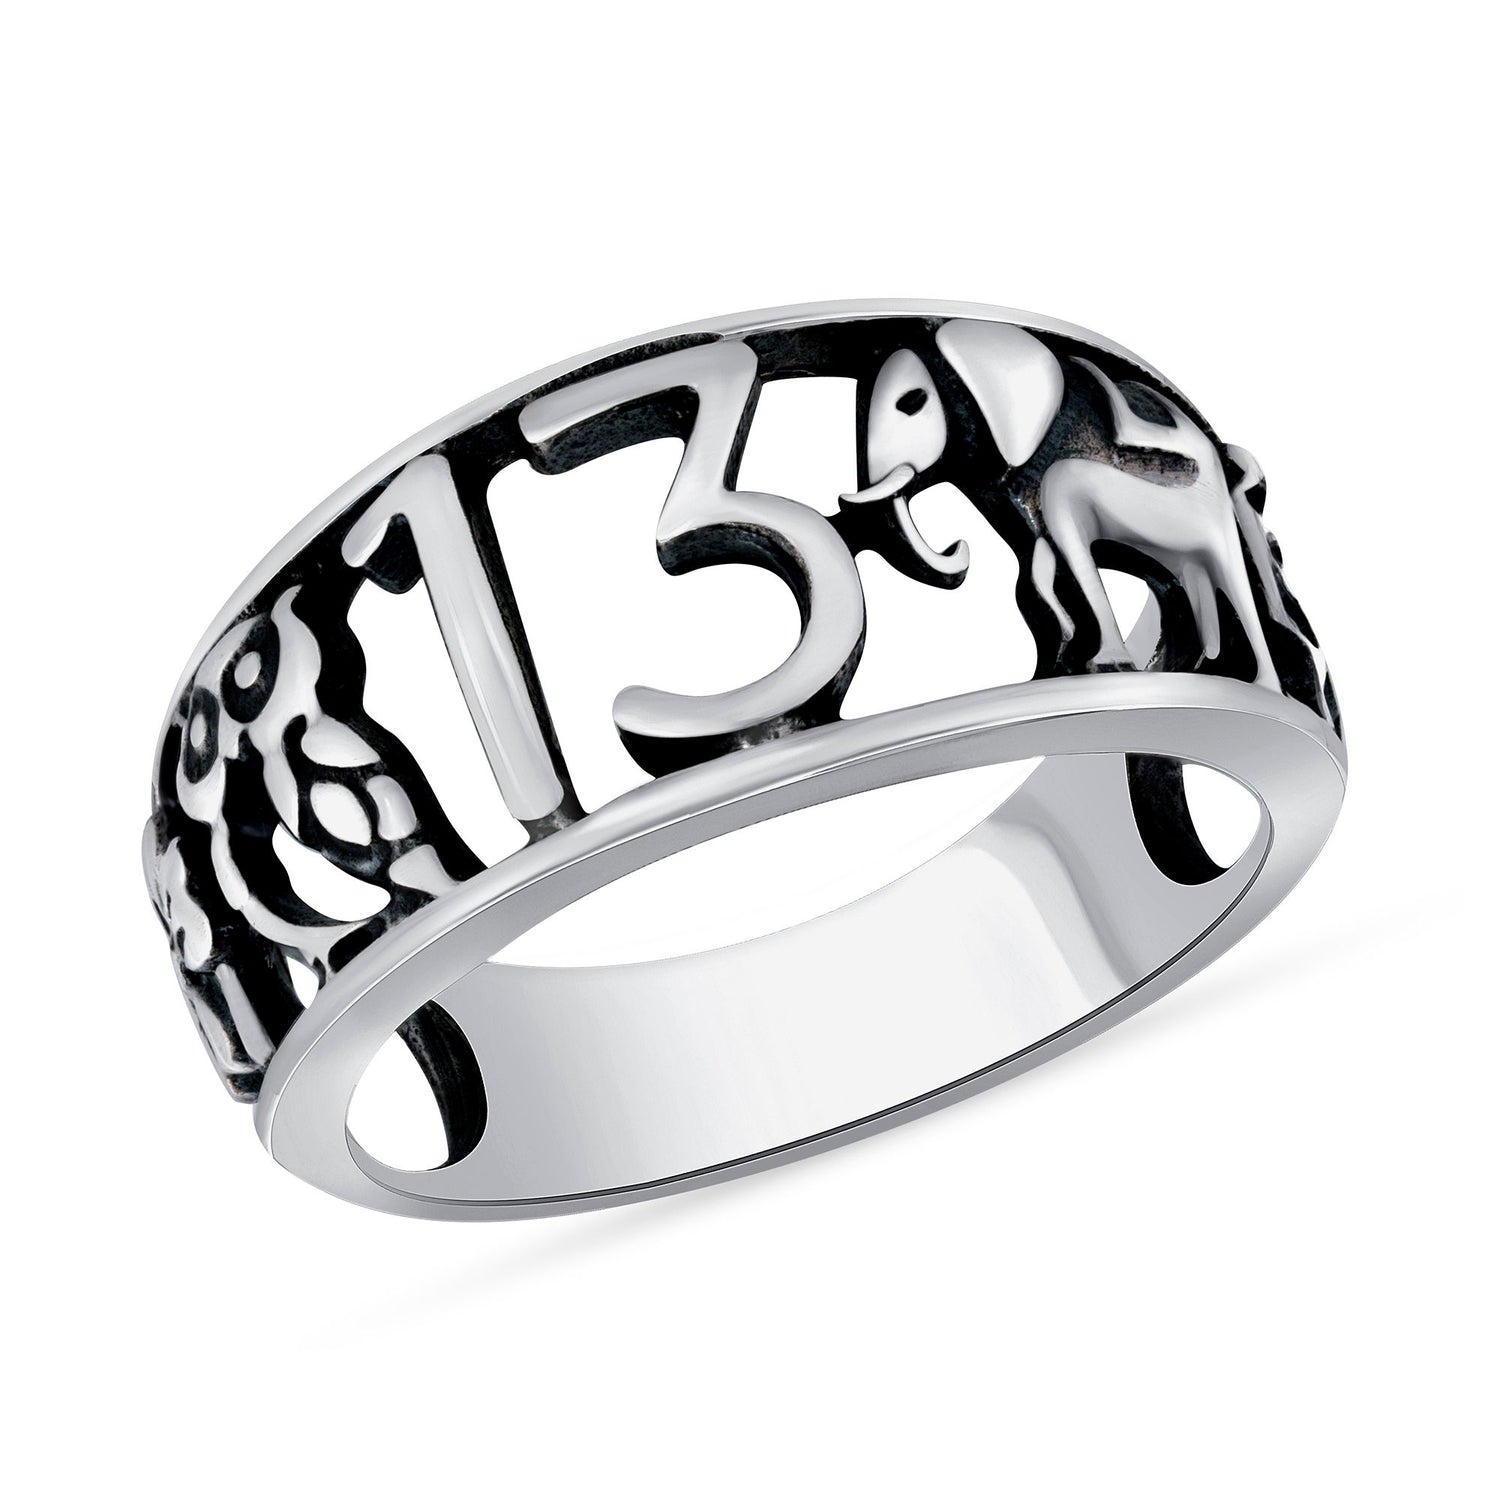 Oxidized 925 Sterling Silver Mixed Lucky Symbols Men&